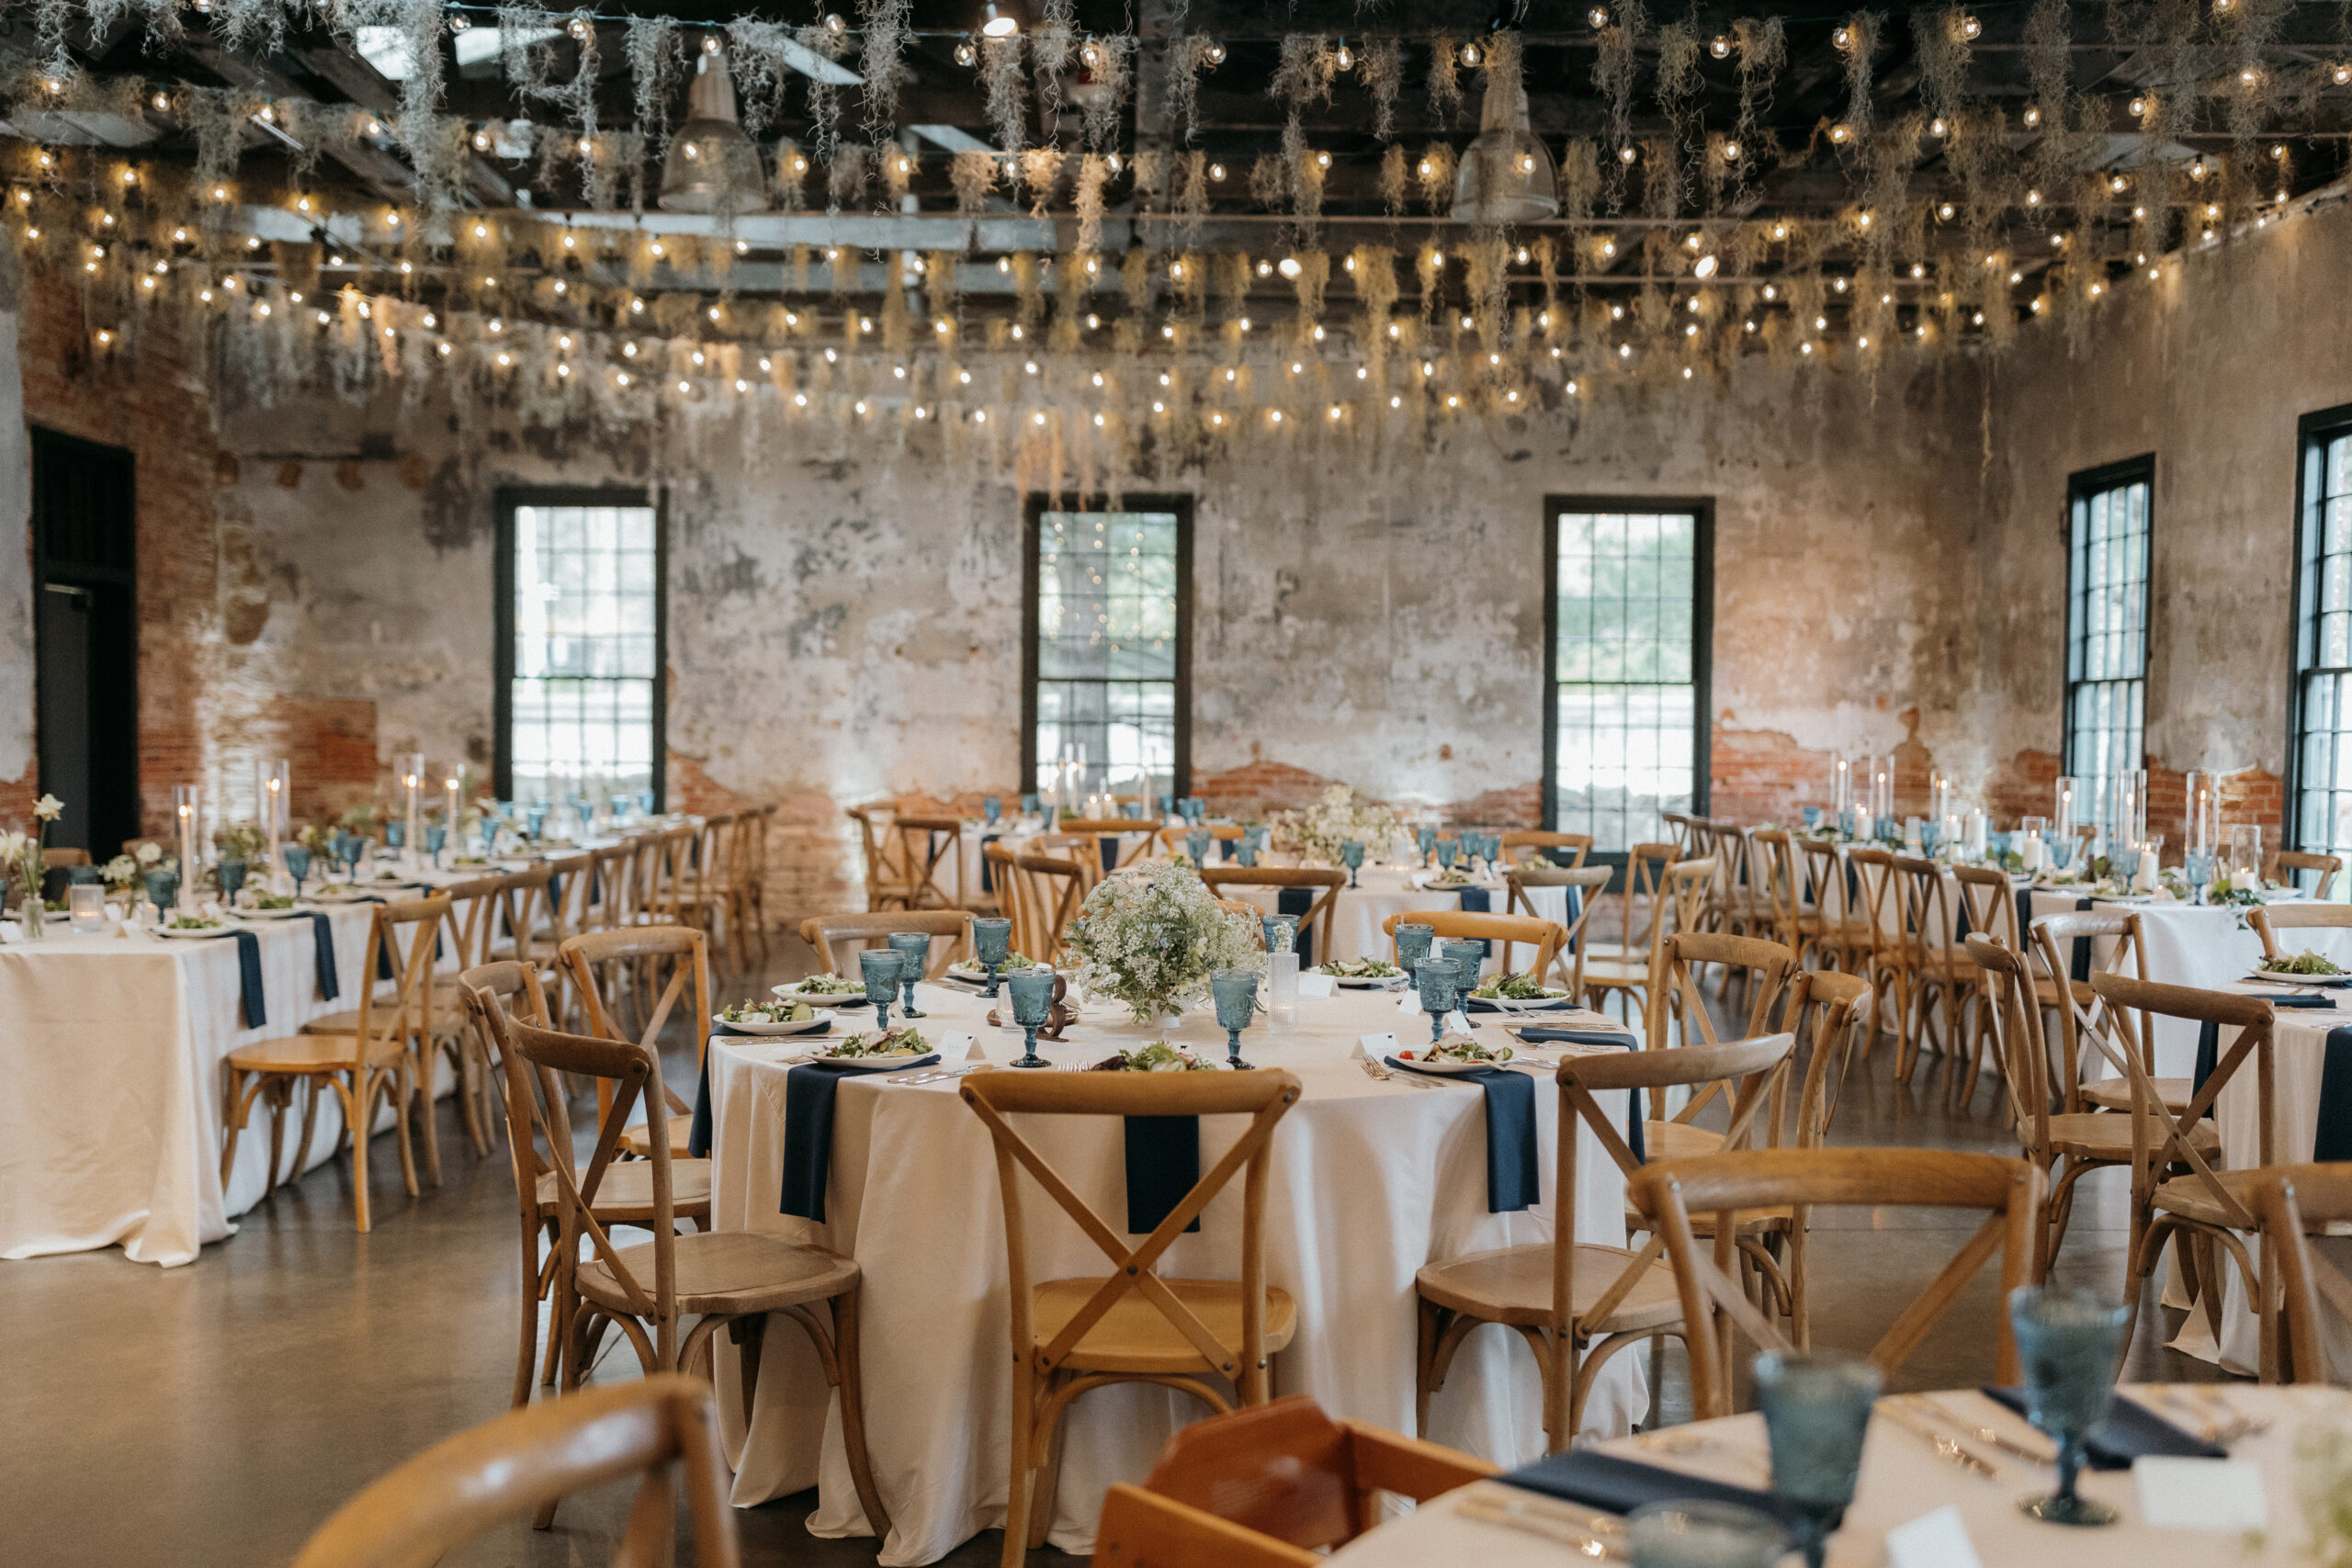 A decorated room for a wedding with hanging little lights, a large brick wall at the back. Brown wooden timeless chairs, beige, blue, and white colour scheme. Large blue glasses on each table with beautiful floral piece sin the center.